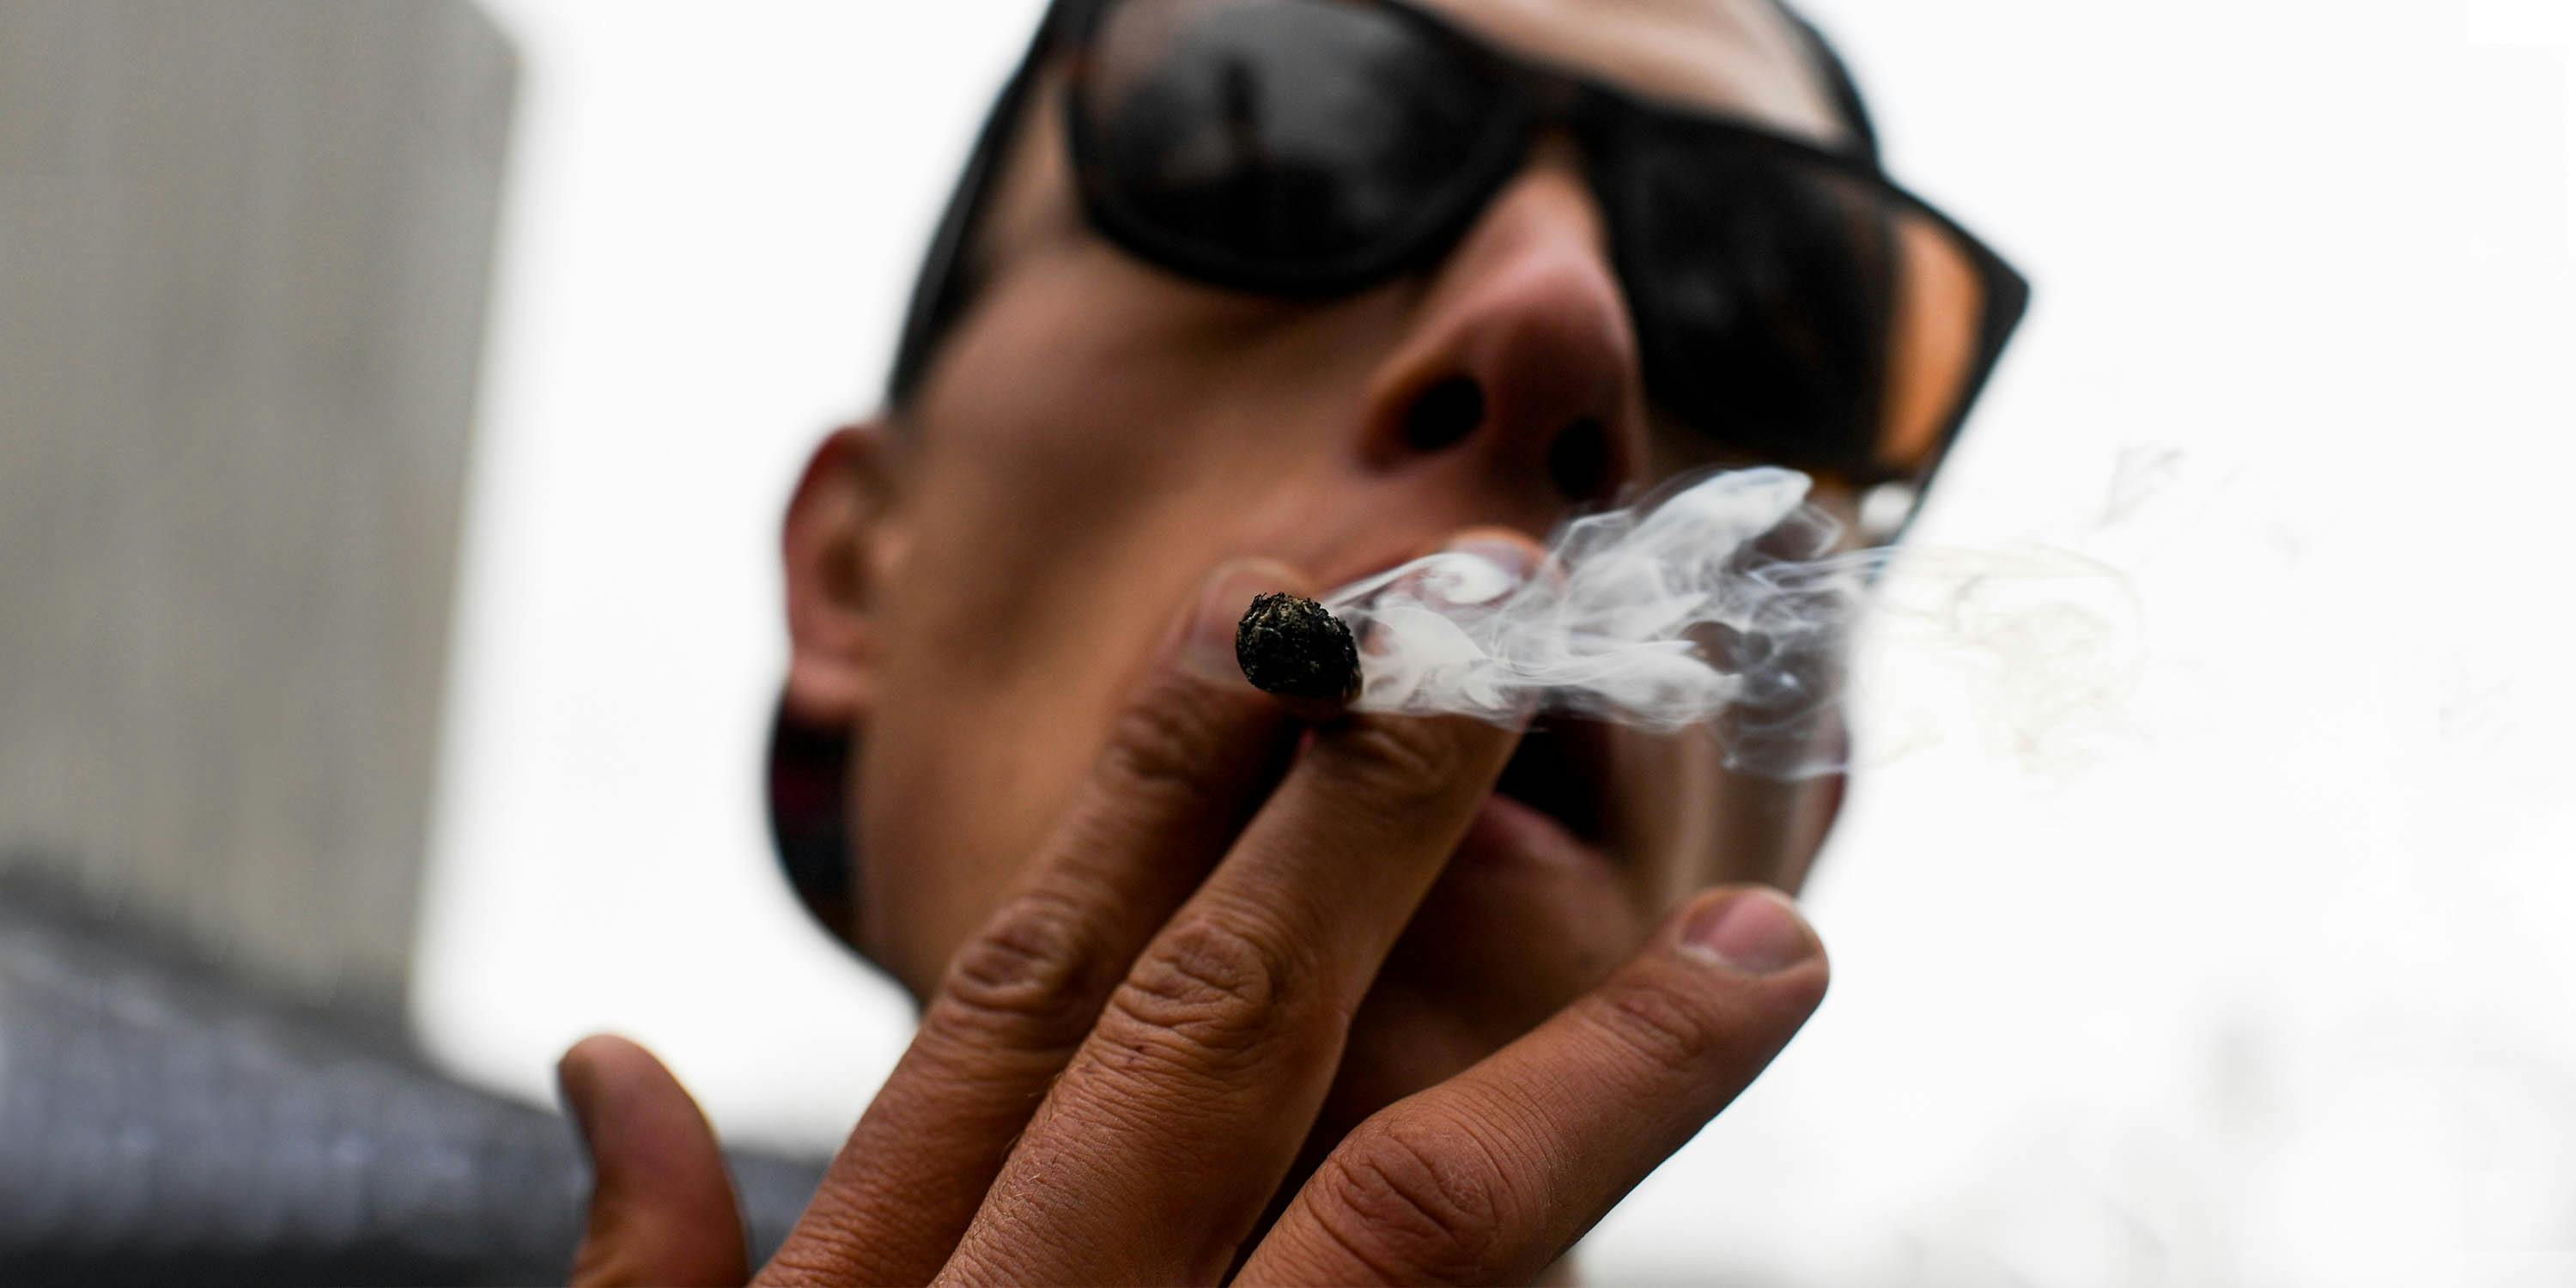 A man smokes a blunt while wearing glasses. Statistics show that cannabis use disorder is a real thing, and numbers are soaring.